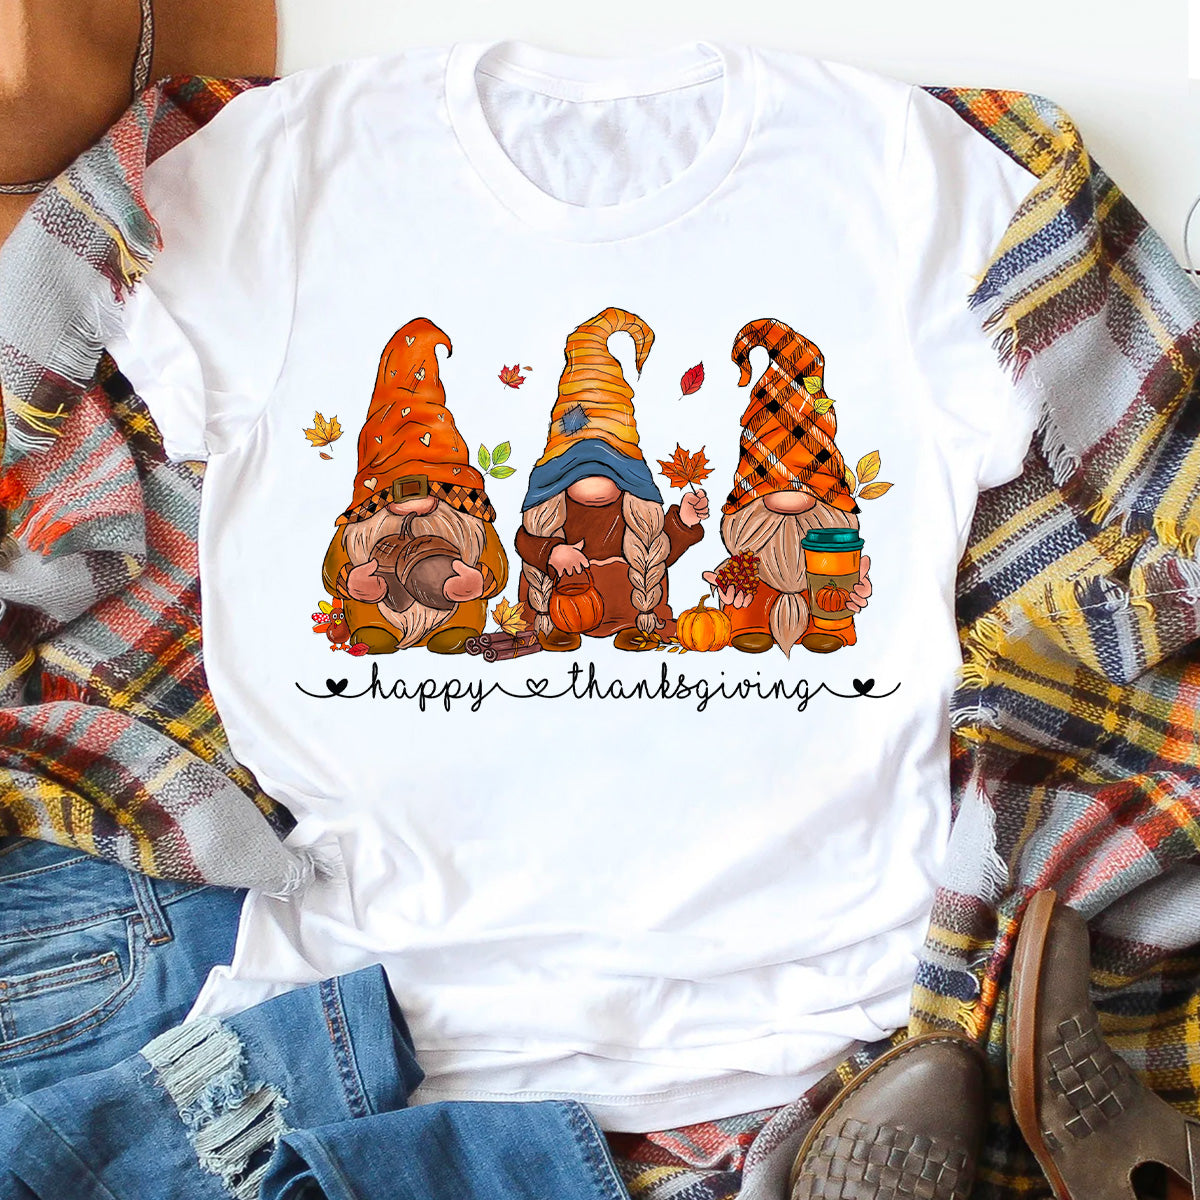 Happy Thanksgiving with Gnomes T-Shirt